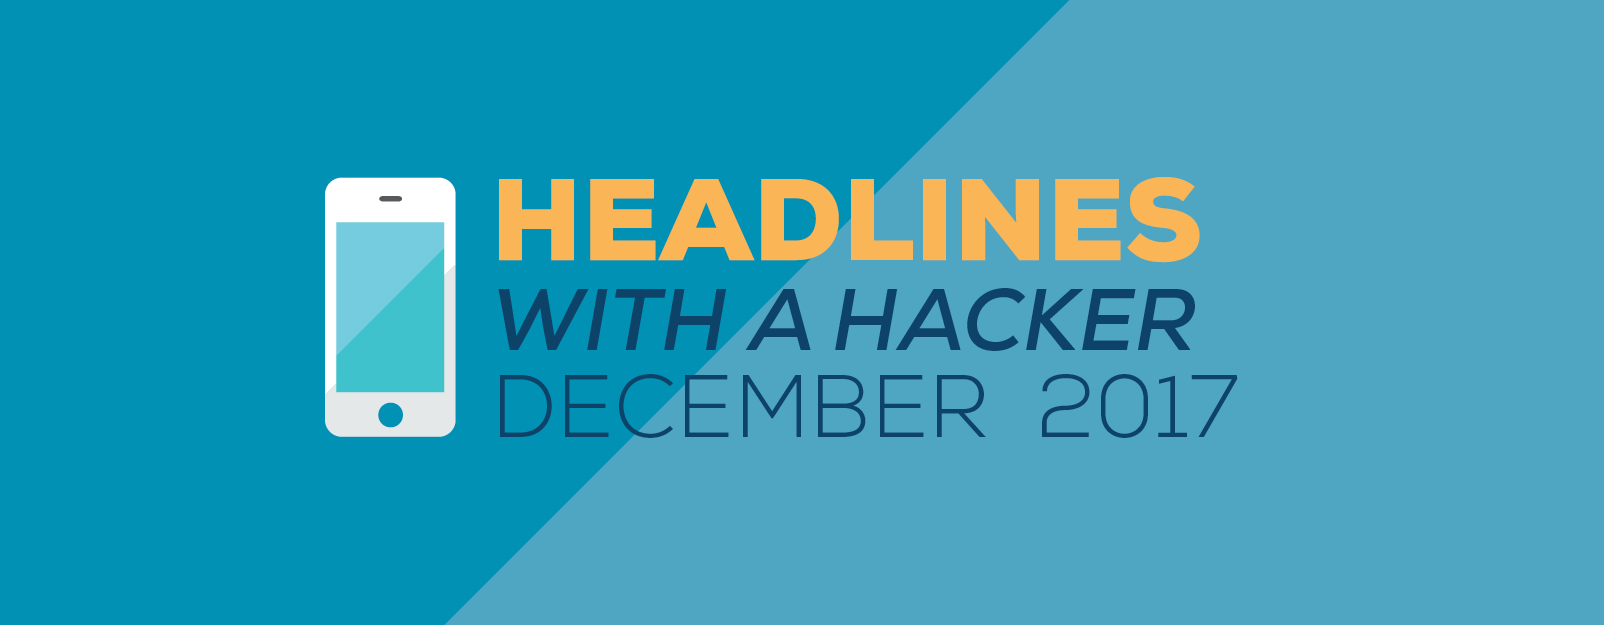 Graphic image saying, "Headlines with a Hacker December 2017"